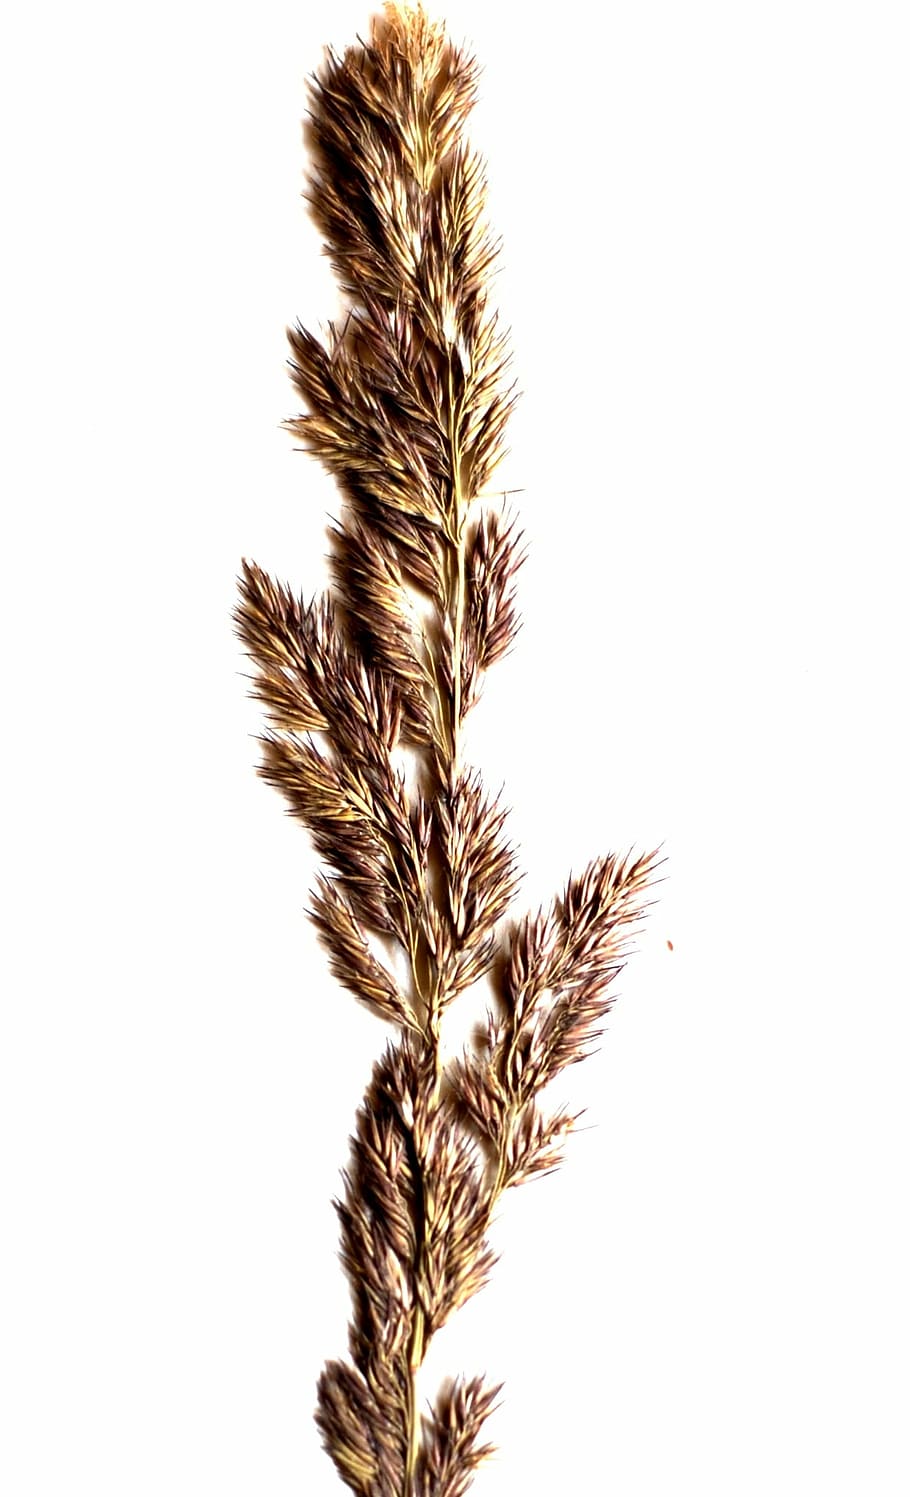 a grass, spikelet, white, nature, seed, isolated, studio shot, growth, close-up, plant